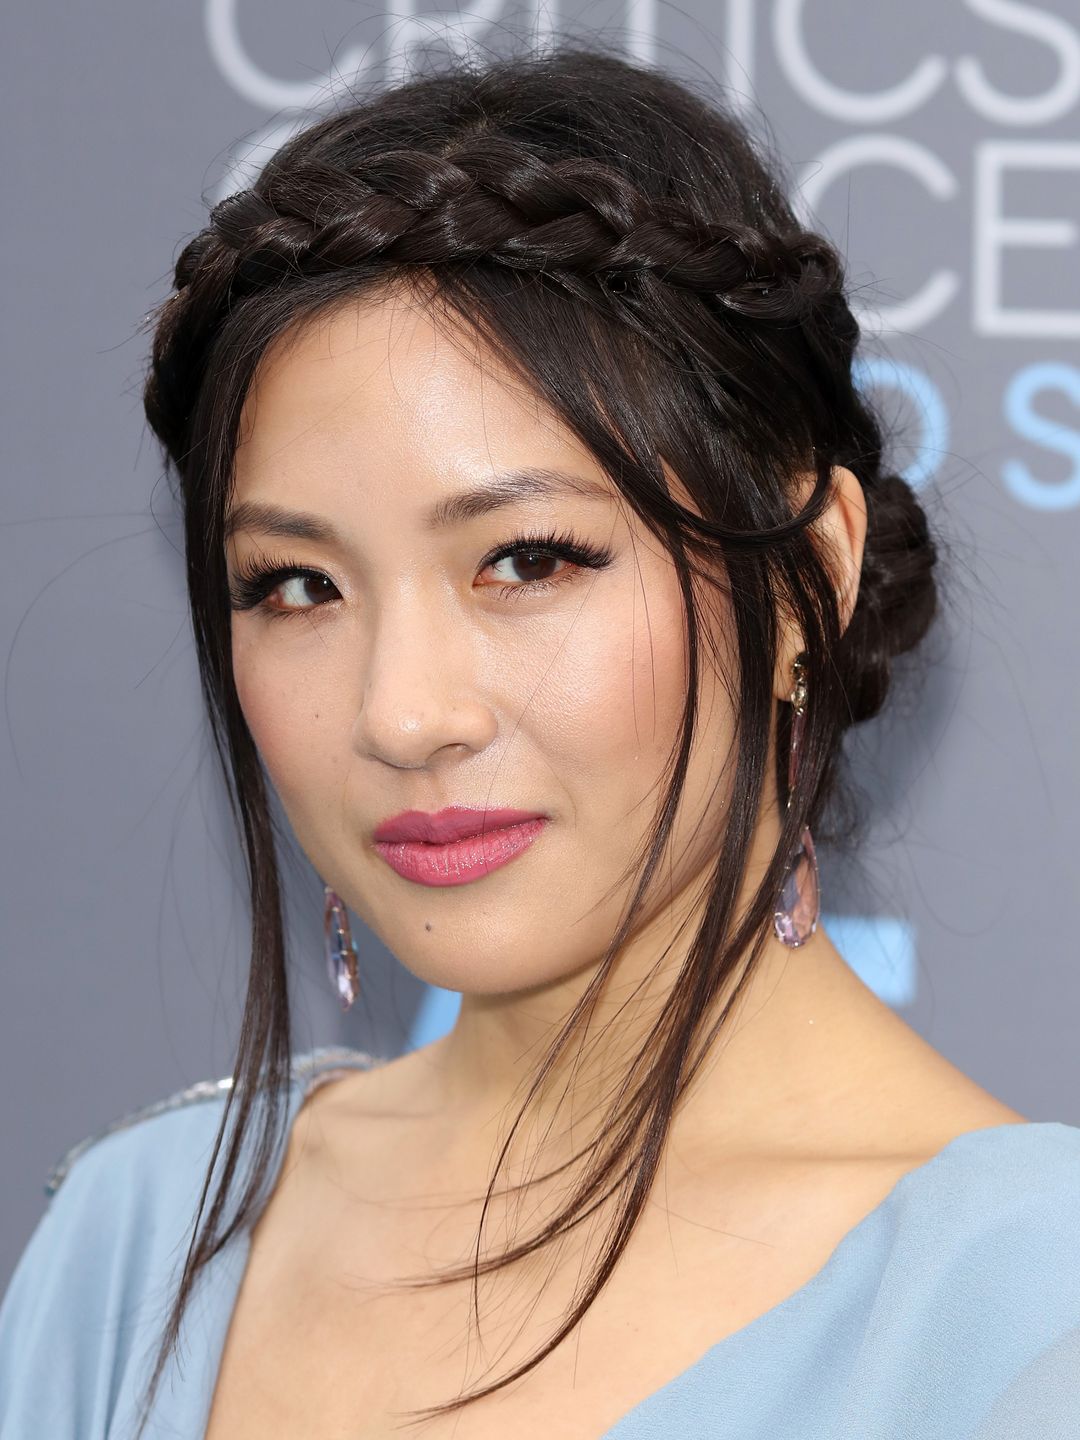 Constance Wu date of birth